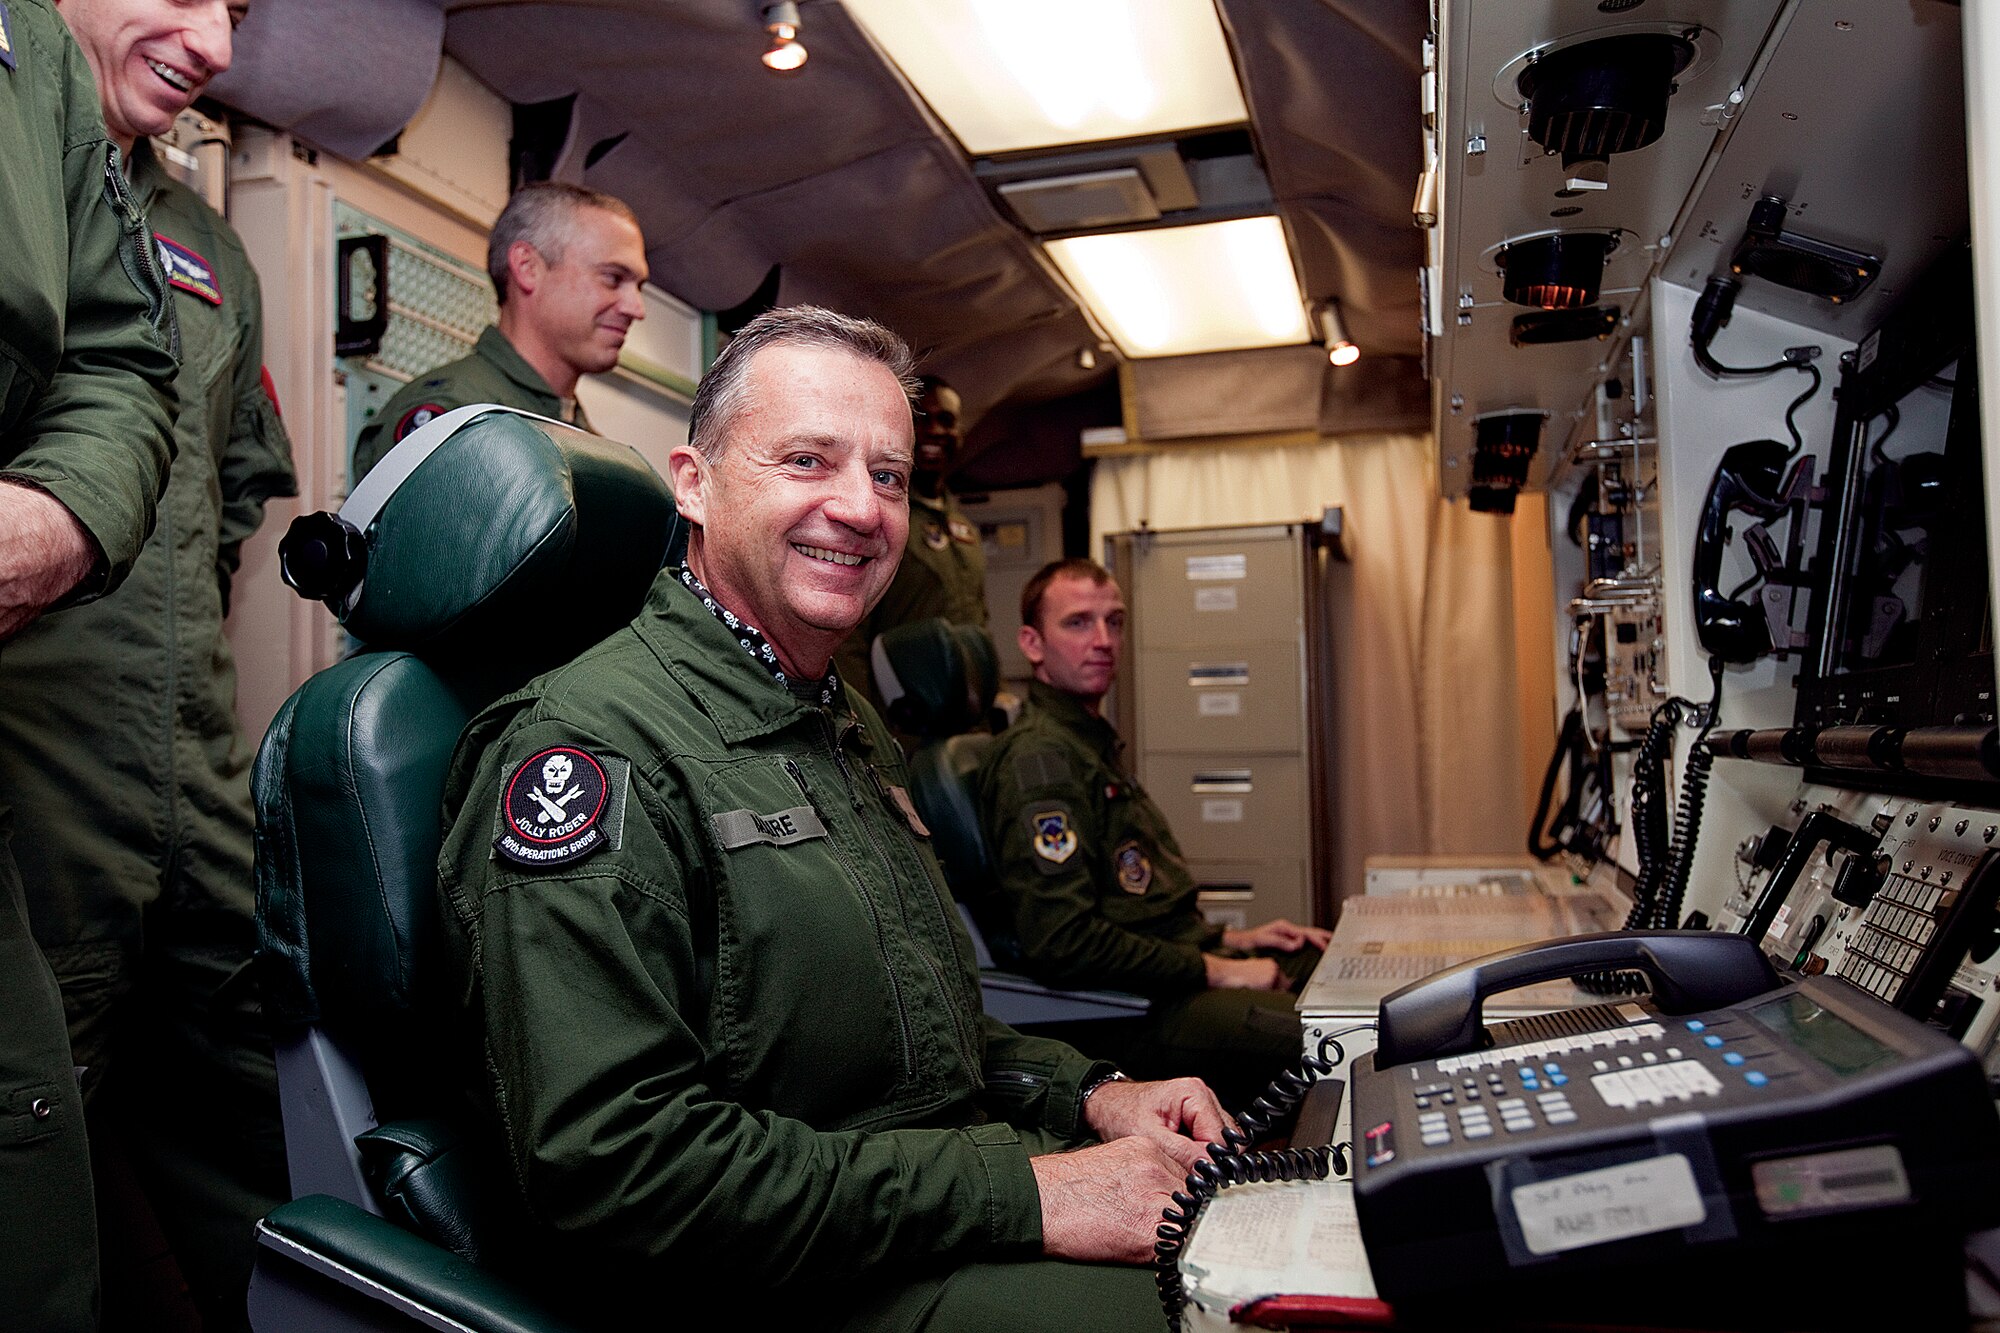 Major Gen. Gratien Maire, French Defense Attache to the U.S., sits at the console in a launch control center during a visit to F. E. Warren Air Force Base Nov. 18 through 20. (U.S. Air Force photo by Jeff Allred)